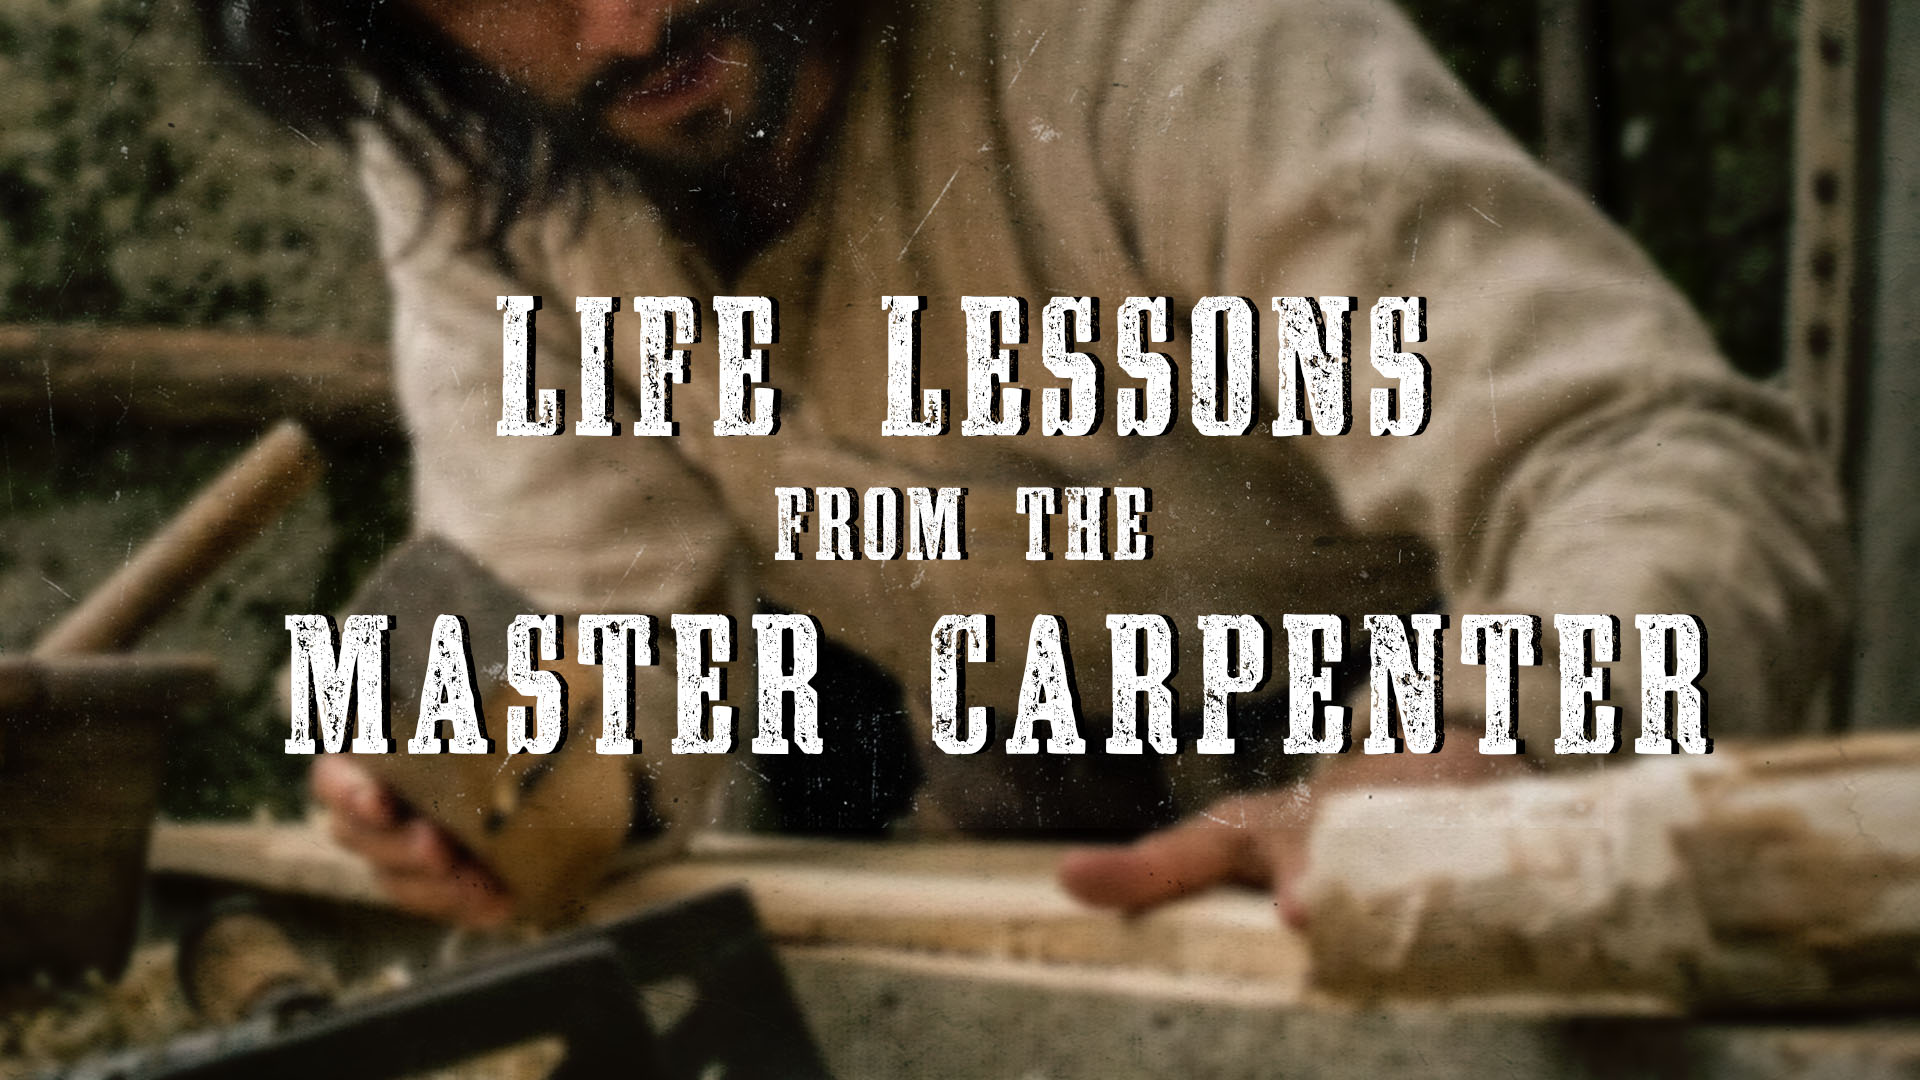 LIFE LESSONS FROM THE MASTER CARPENTER